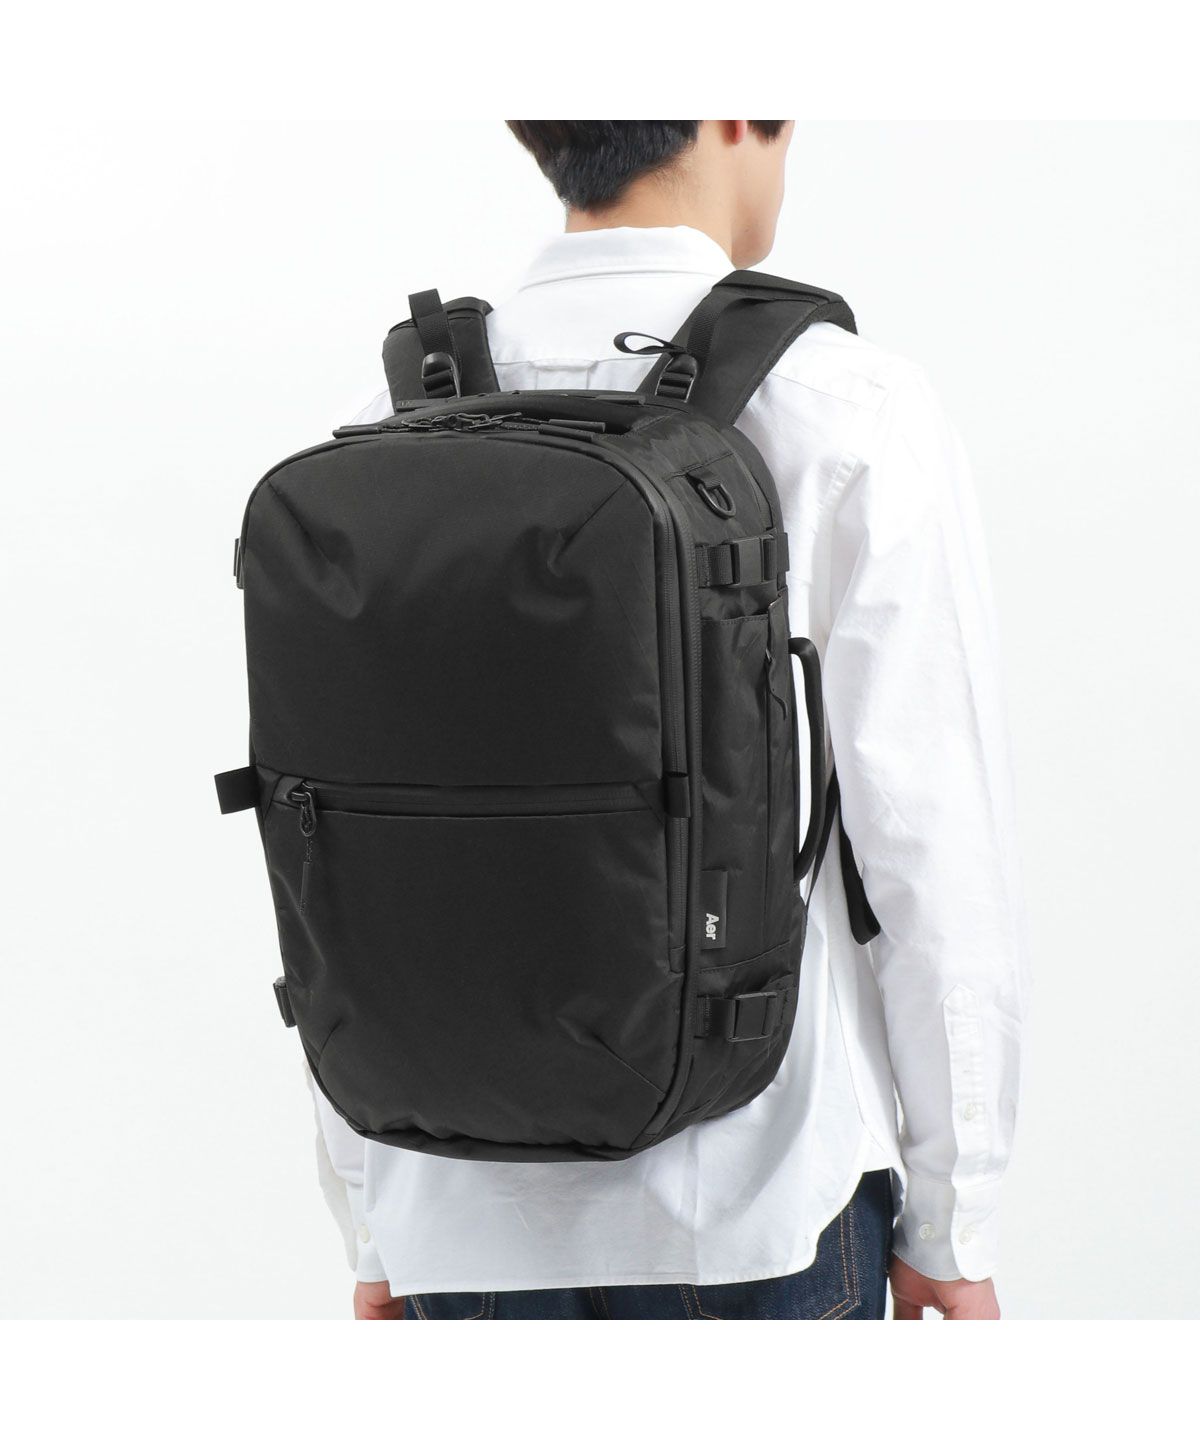 Aer Travel Pack 2 Small - トラベルバッグ